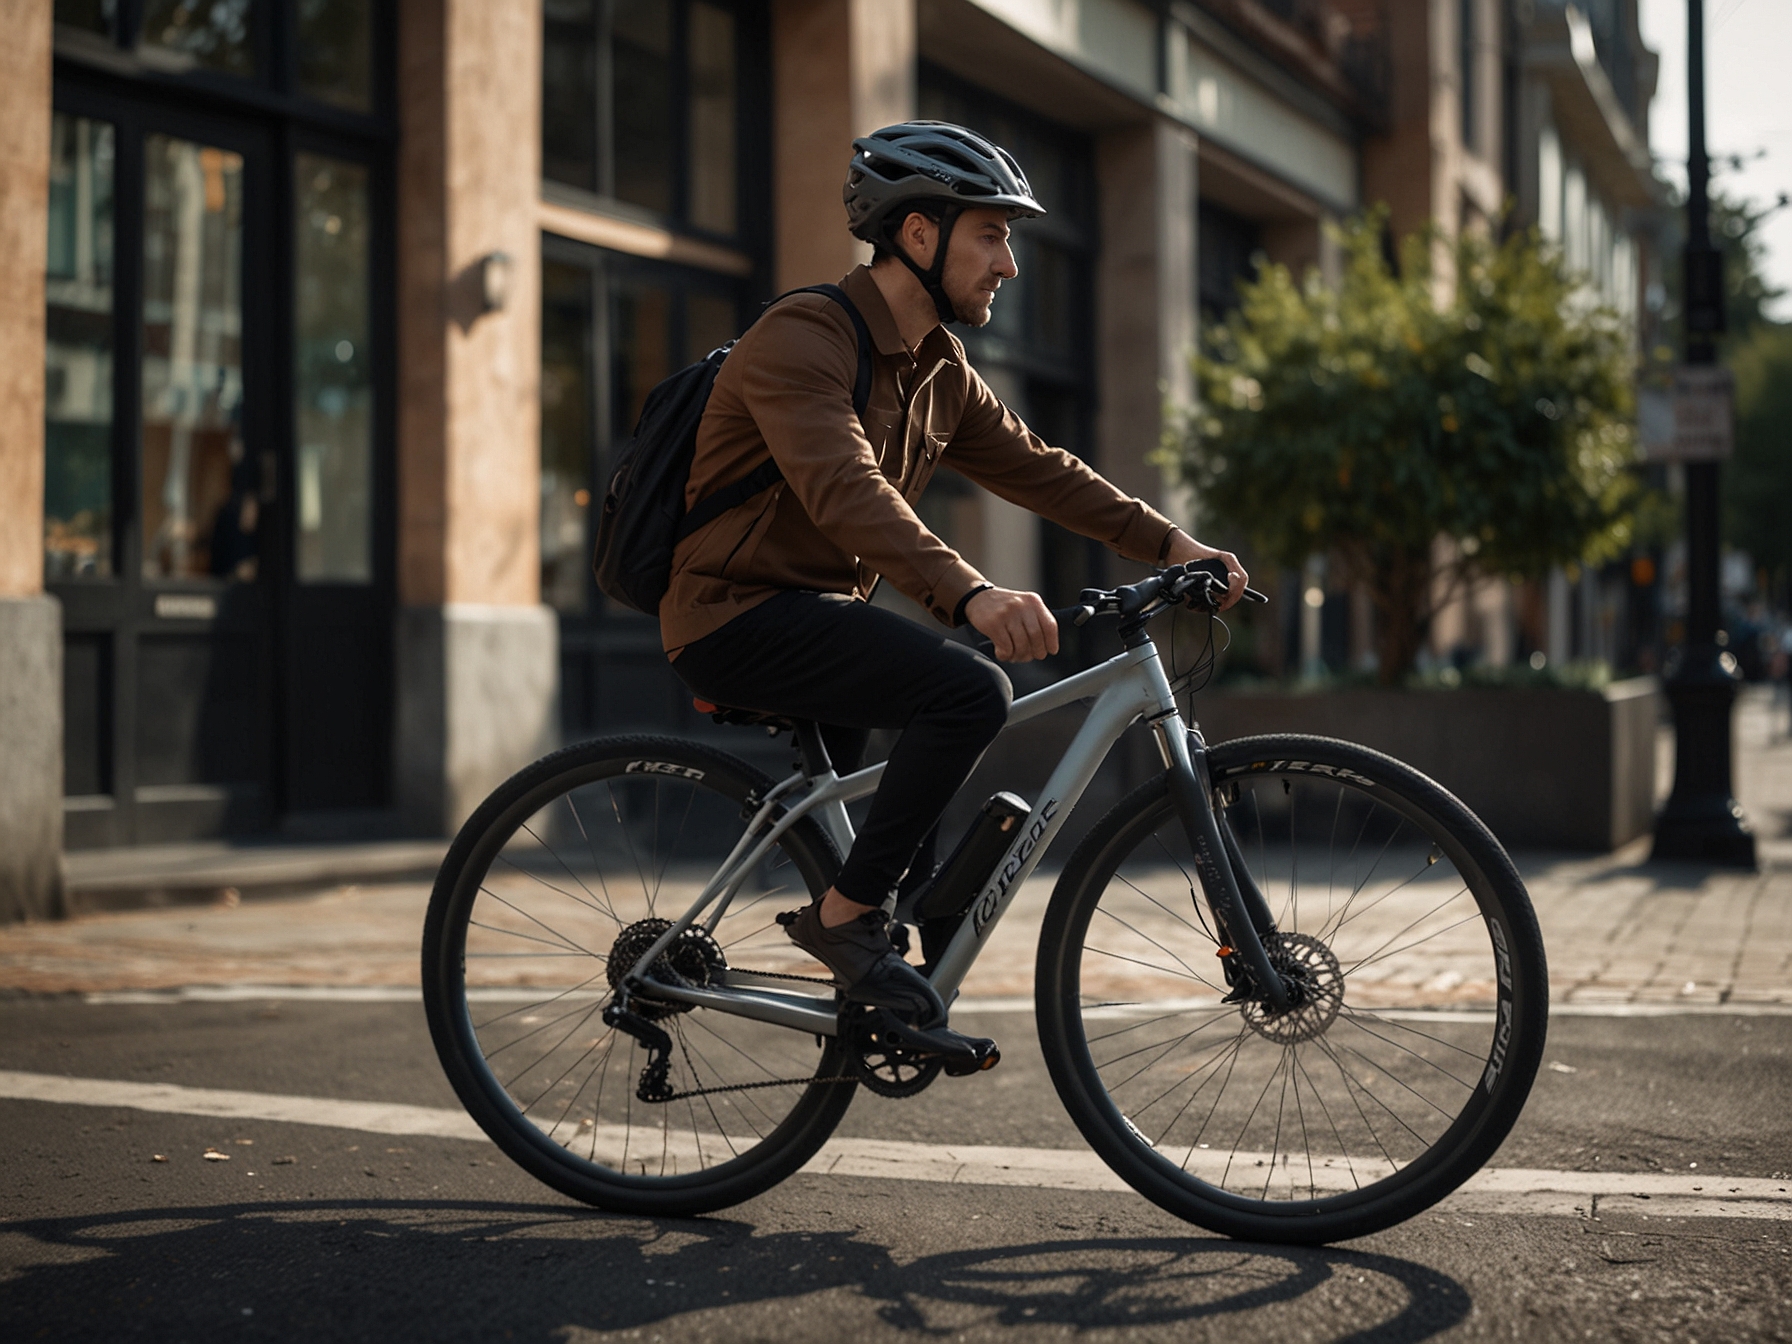 Image of the Orbea Diem 30 e-bike in an urban setting, showing its sleek design and aluminum frame. Riders can easily navigate through busy streets featuring integrated lighting and ergonomic components.